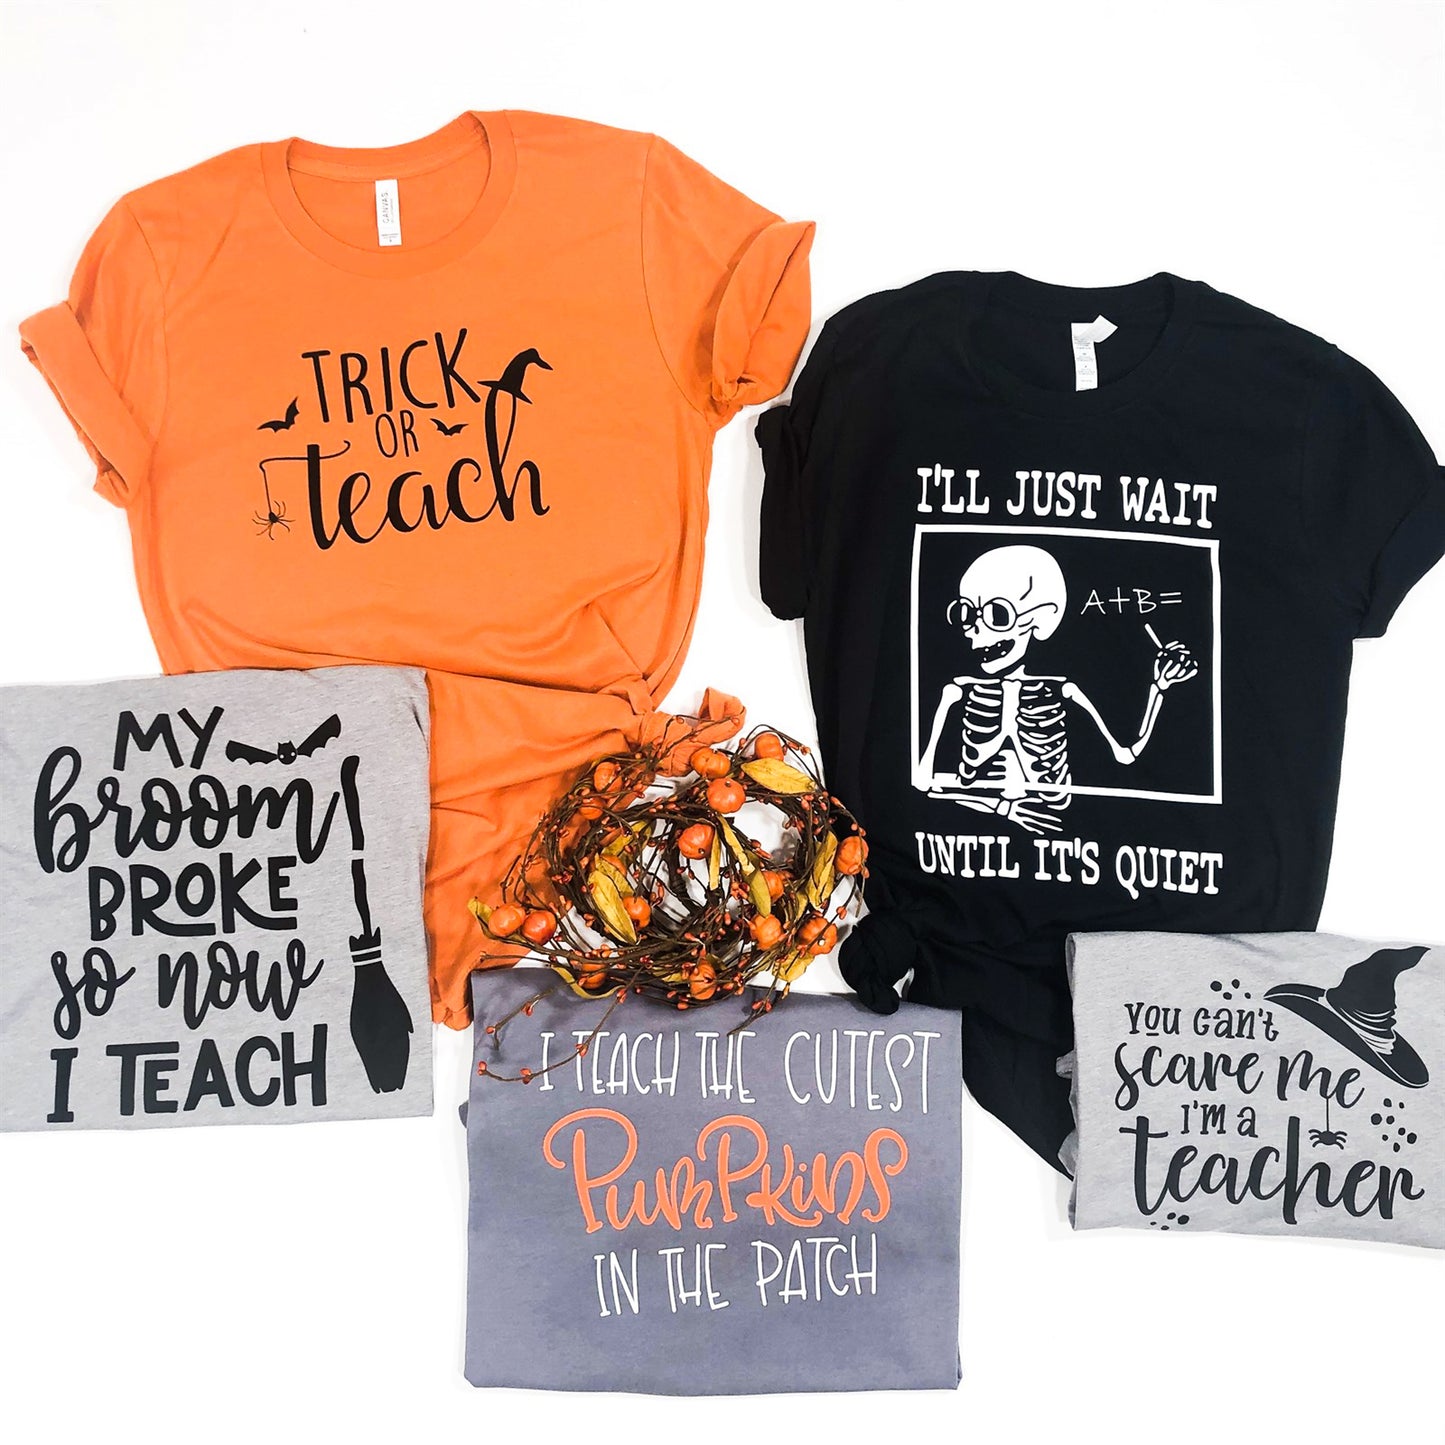 I Teach The Cutest Pumpkins In The Patch Tee